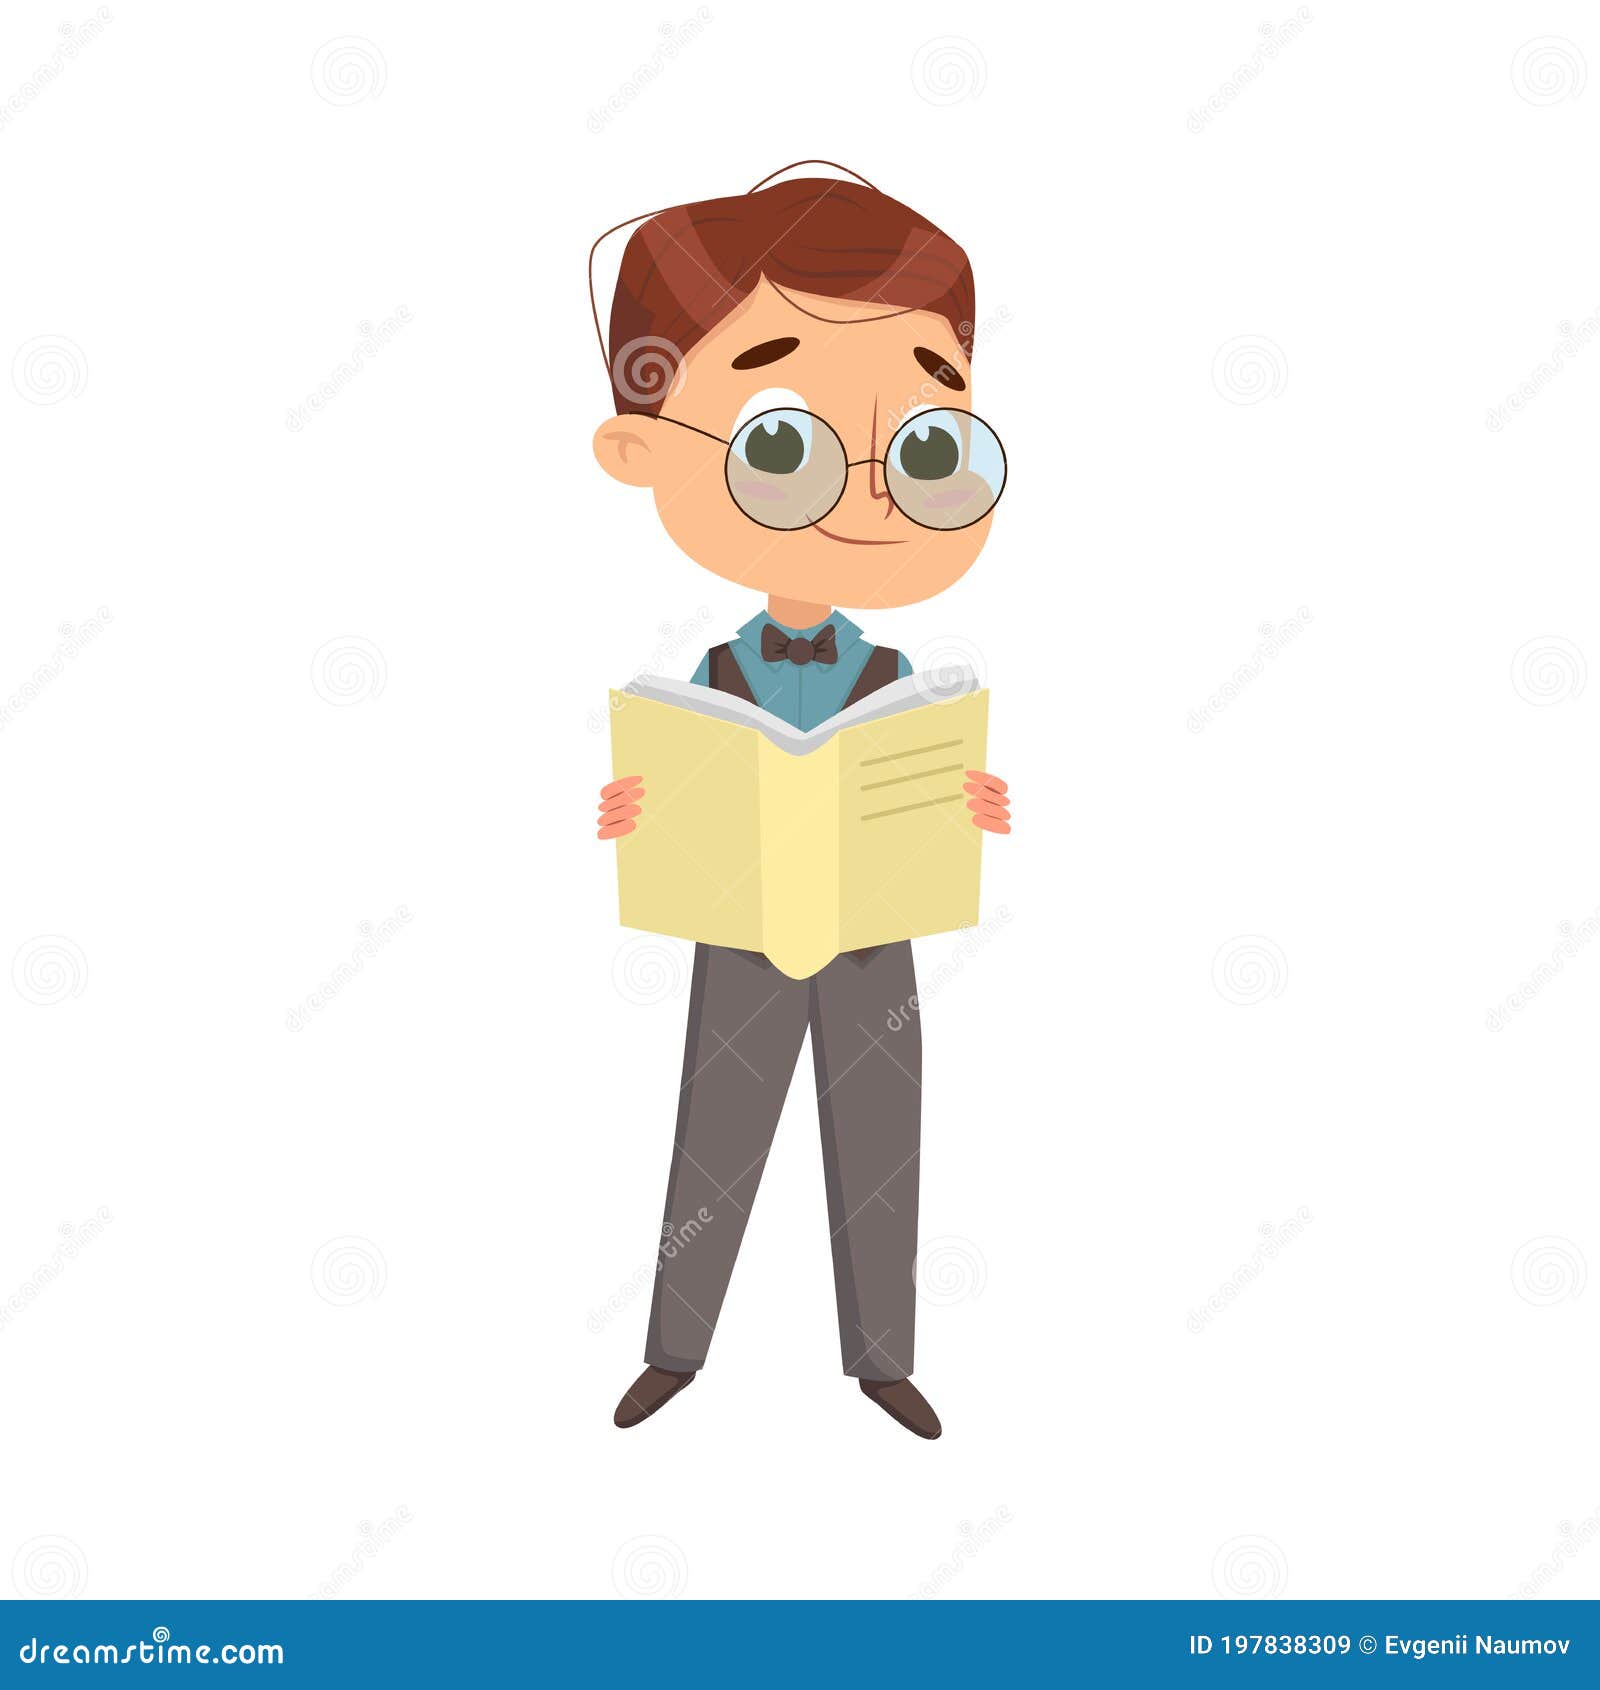 Cute Intelligent Boy Standing and Reading Book, Education and Knowledge  Concept Cartoon Style Vector Illustration Stock Vector - Illustration of  literature, cartoon: 197838309